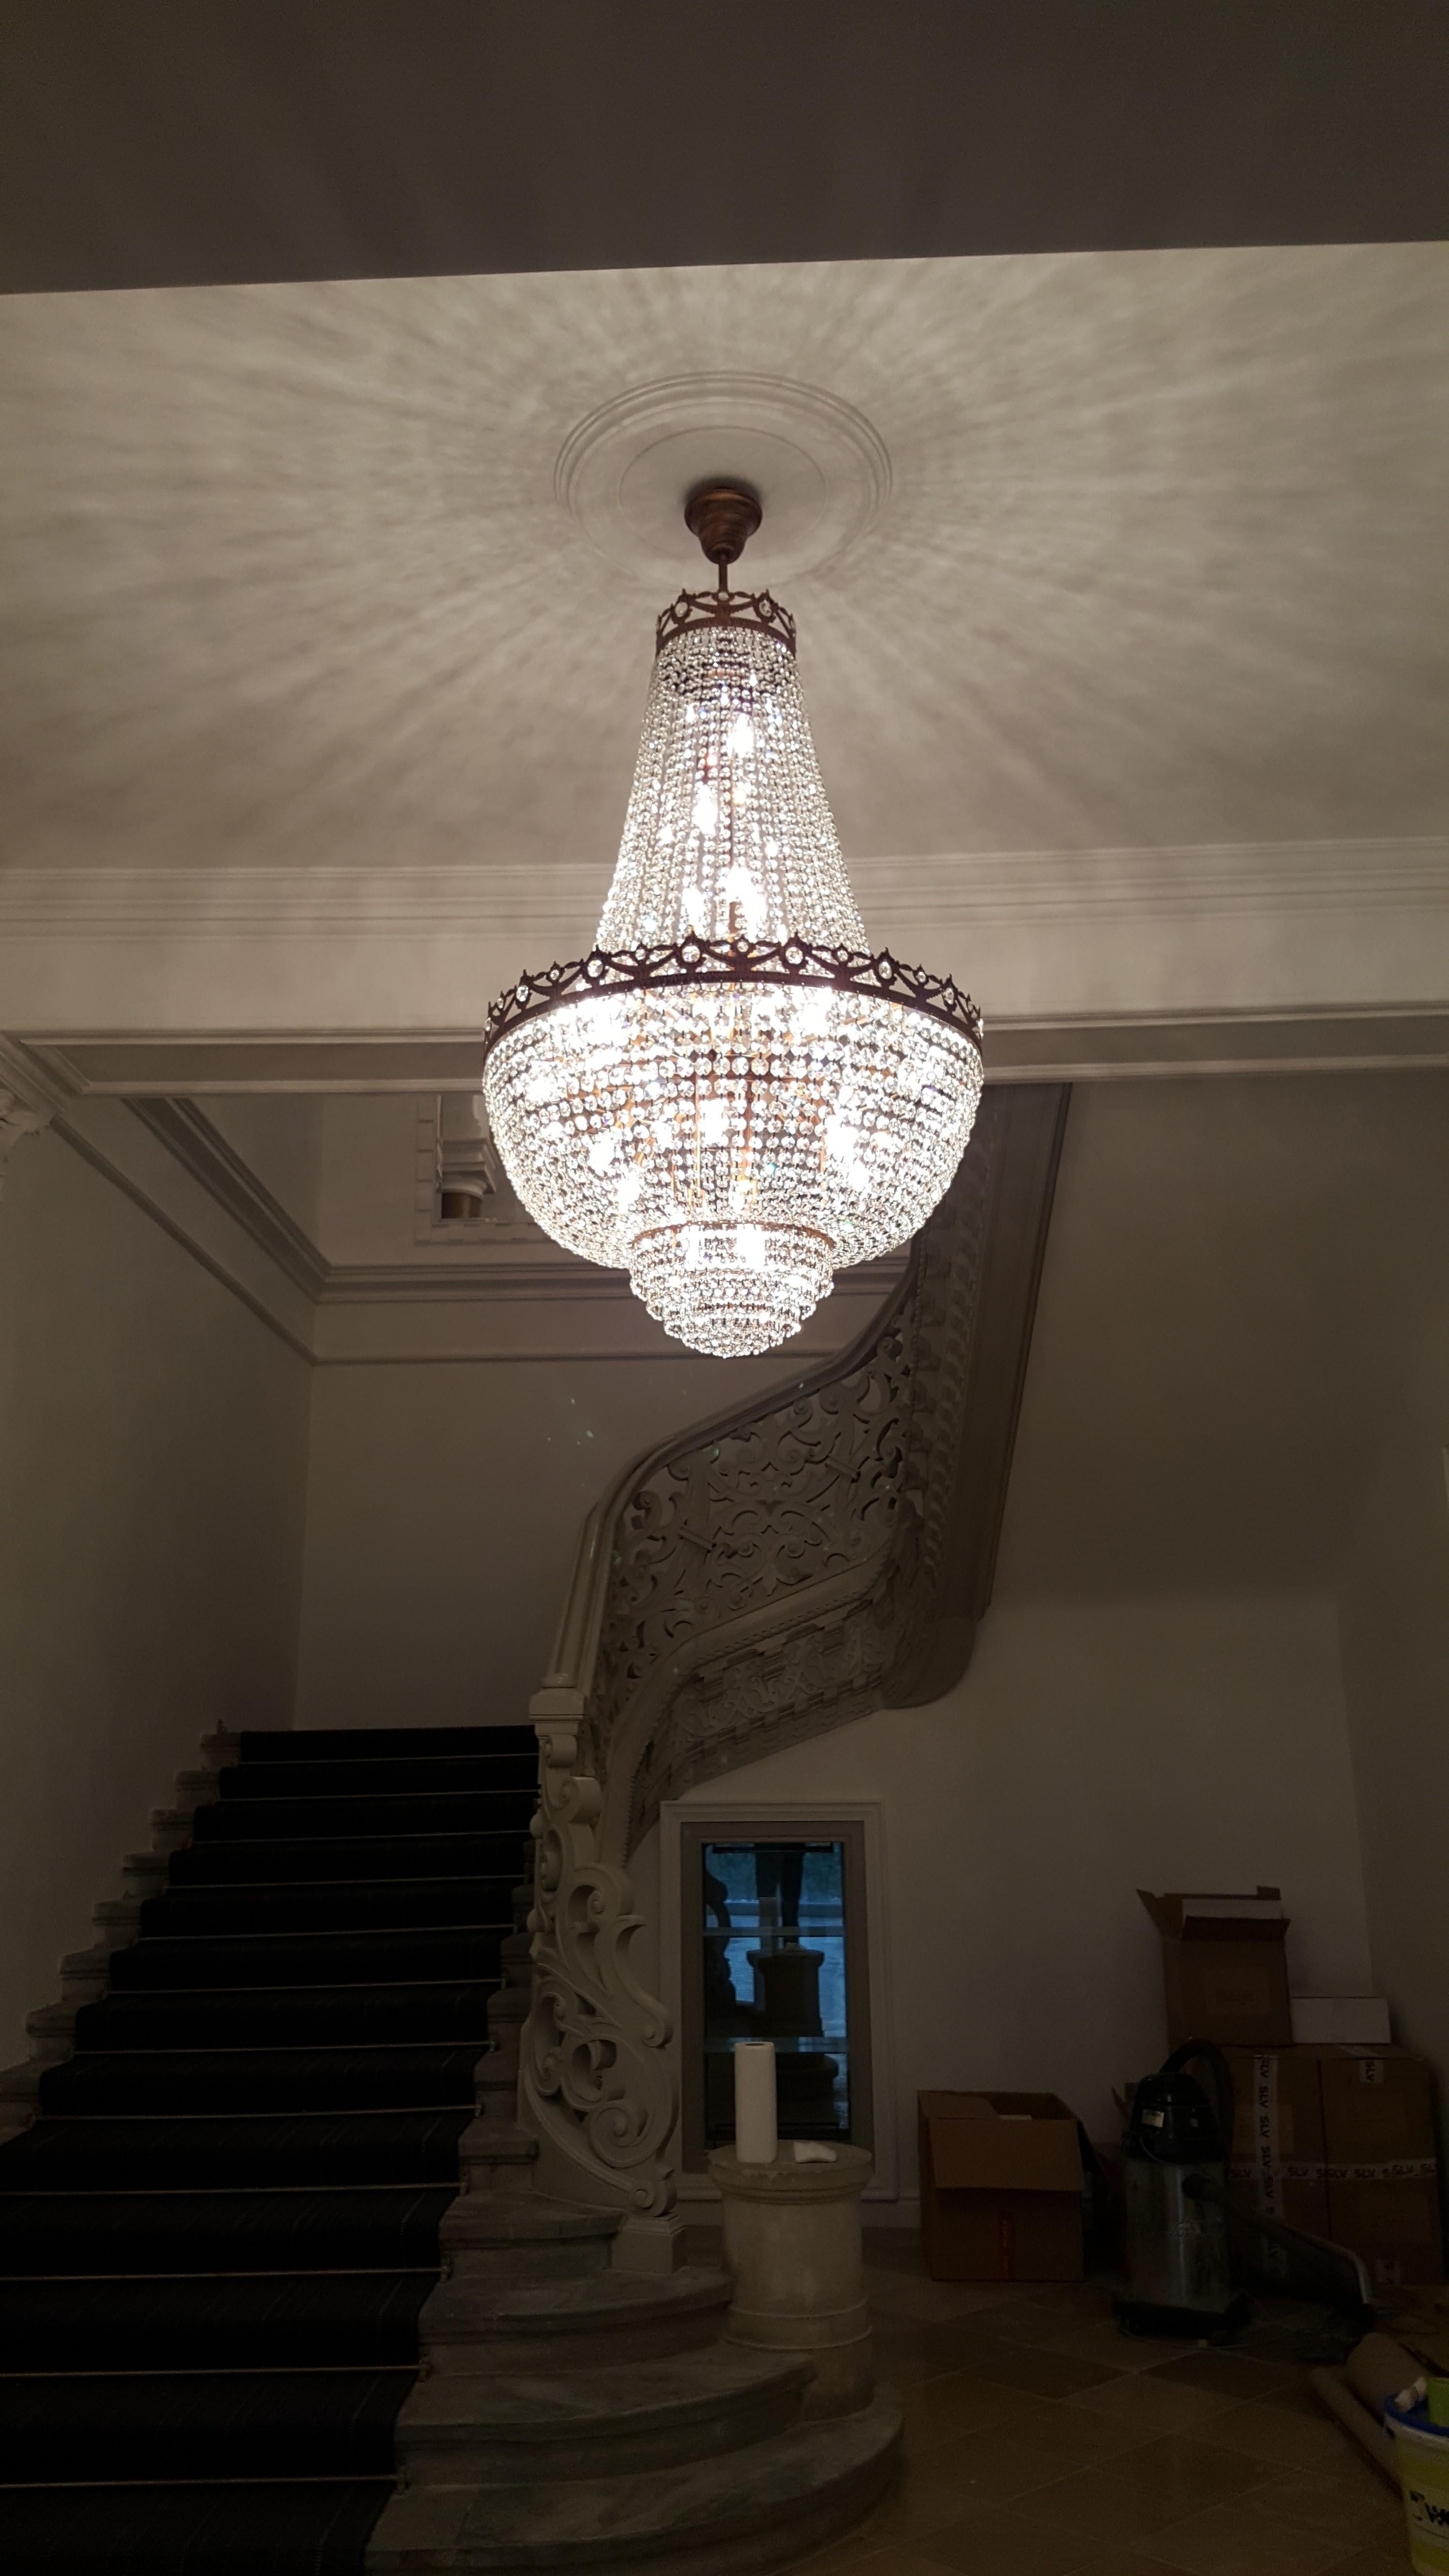 Montgolfière Style Chandelier - Empire Elegance with Customizability

Introducing a new Montgolfière style chandelier that exudes the charm of the Empire era, reimagined with modern elegance. Crafted from lead crystal, this exquisite piece is a